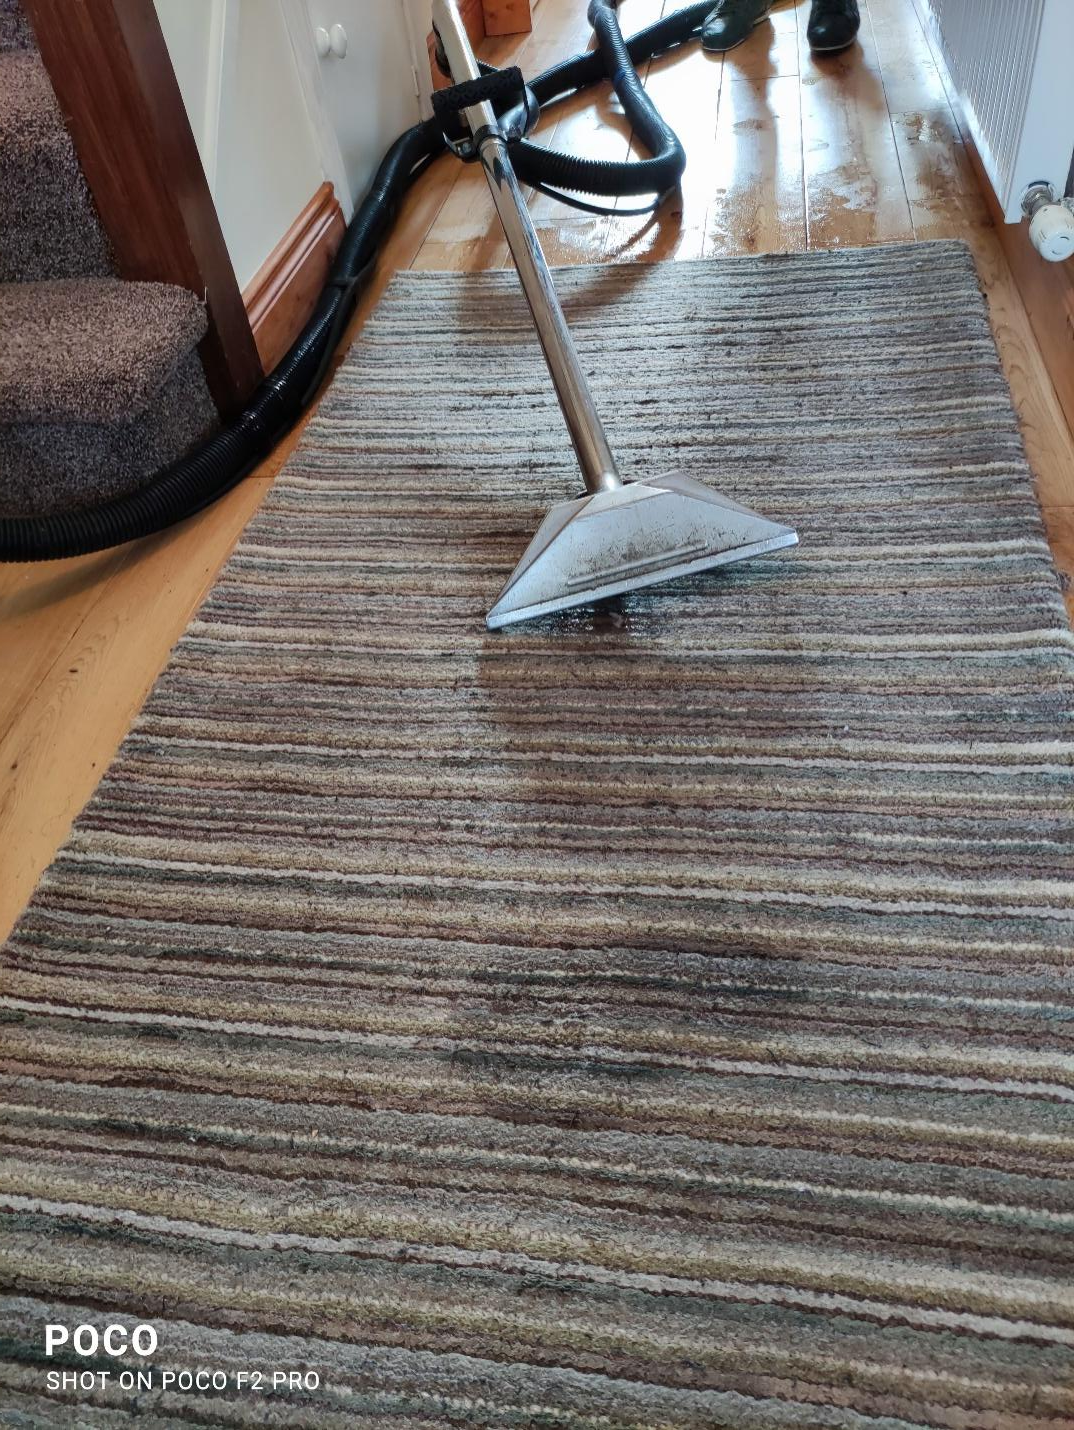 //www.sandyfordcarpetcleaning.ie/wp-content/uploads/2017/07/Picture19.png